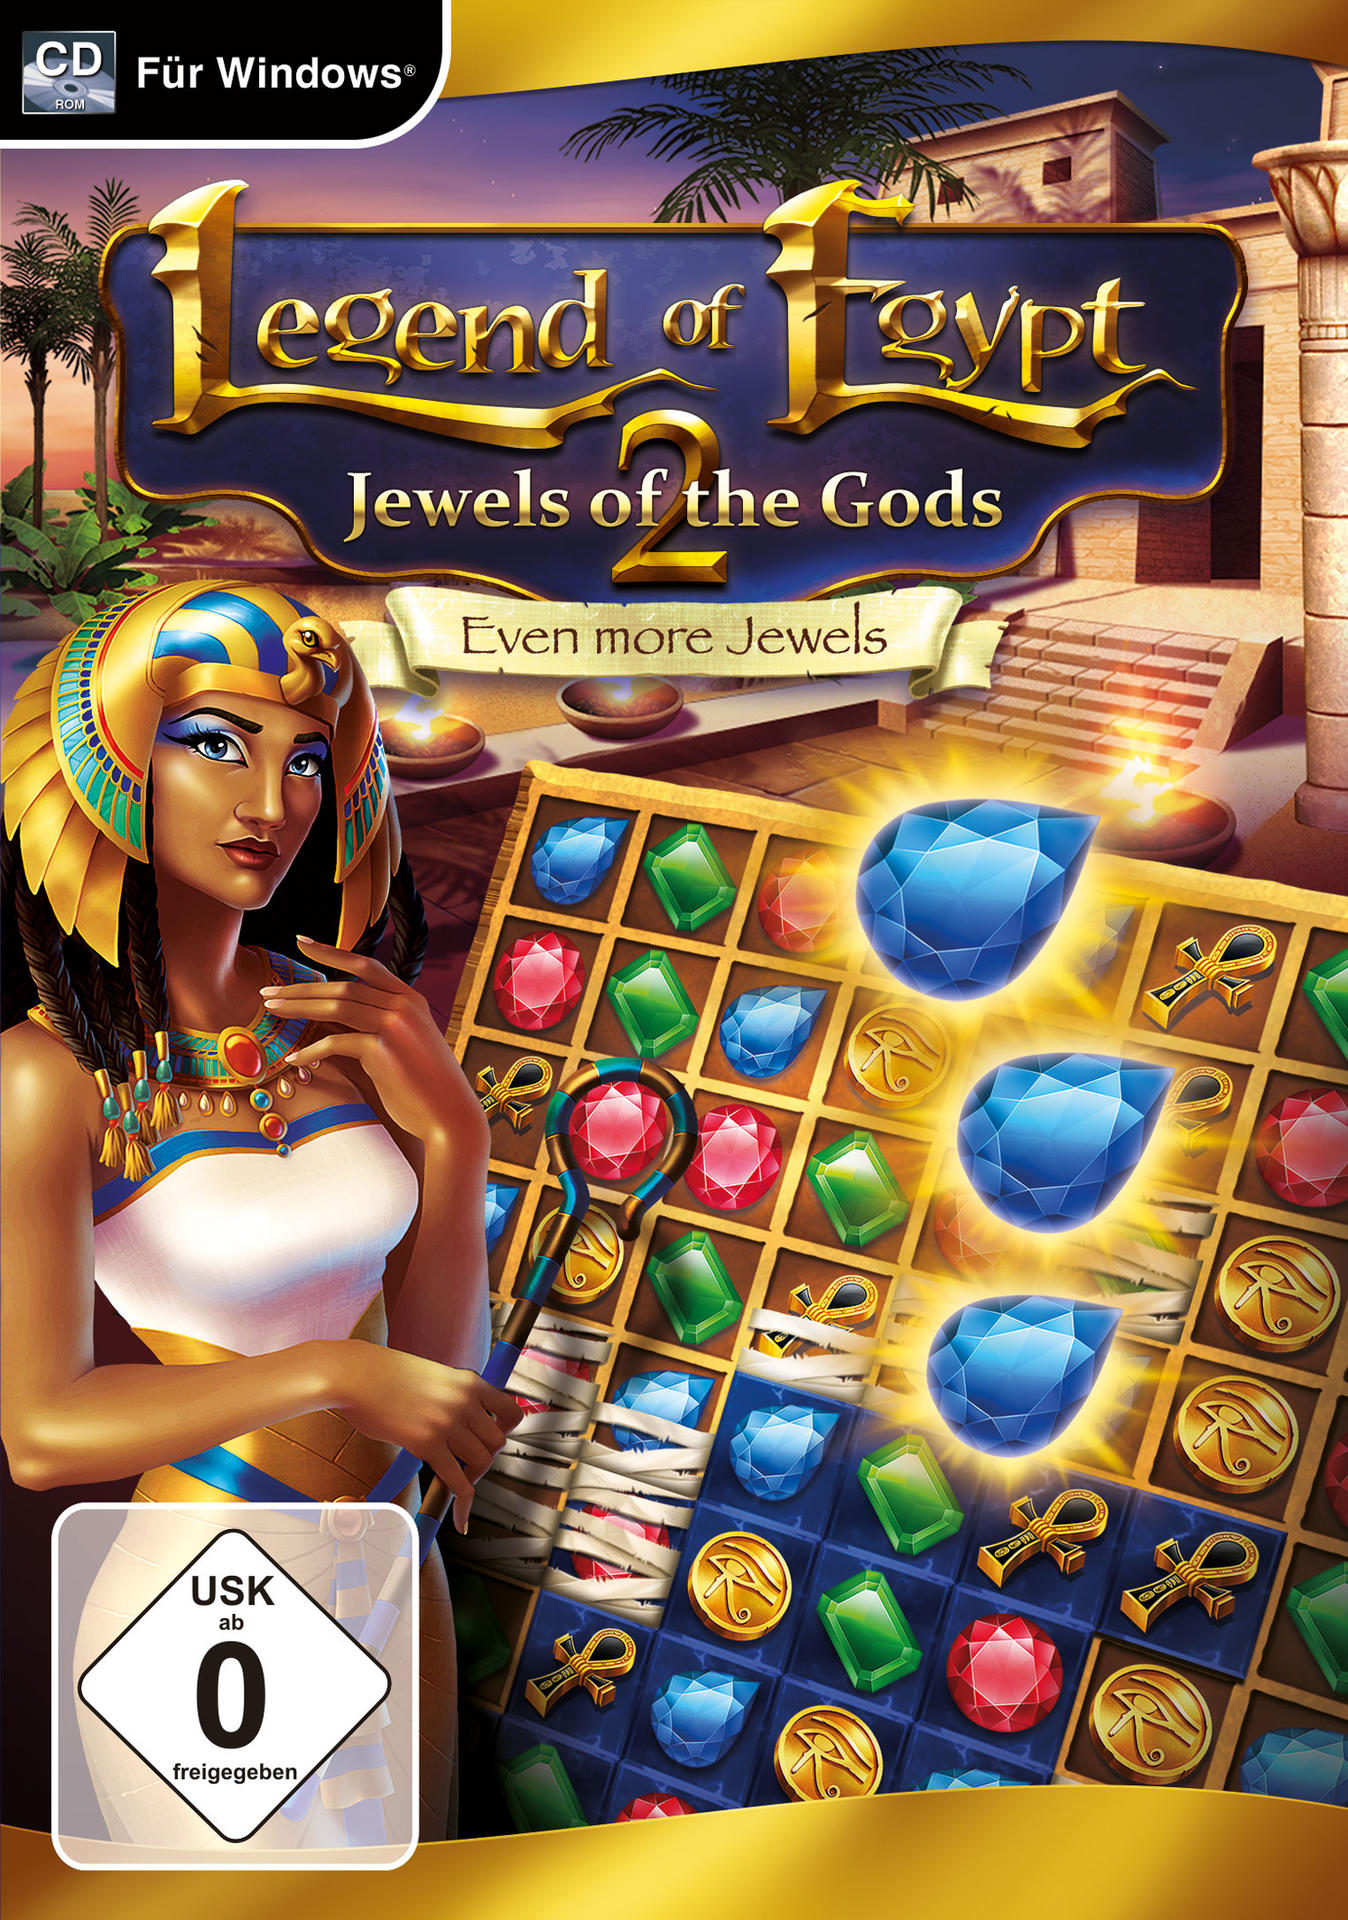 Even Jewels Jewels more - of - [PC] Legend 2 Gods the Egypt: of